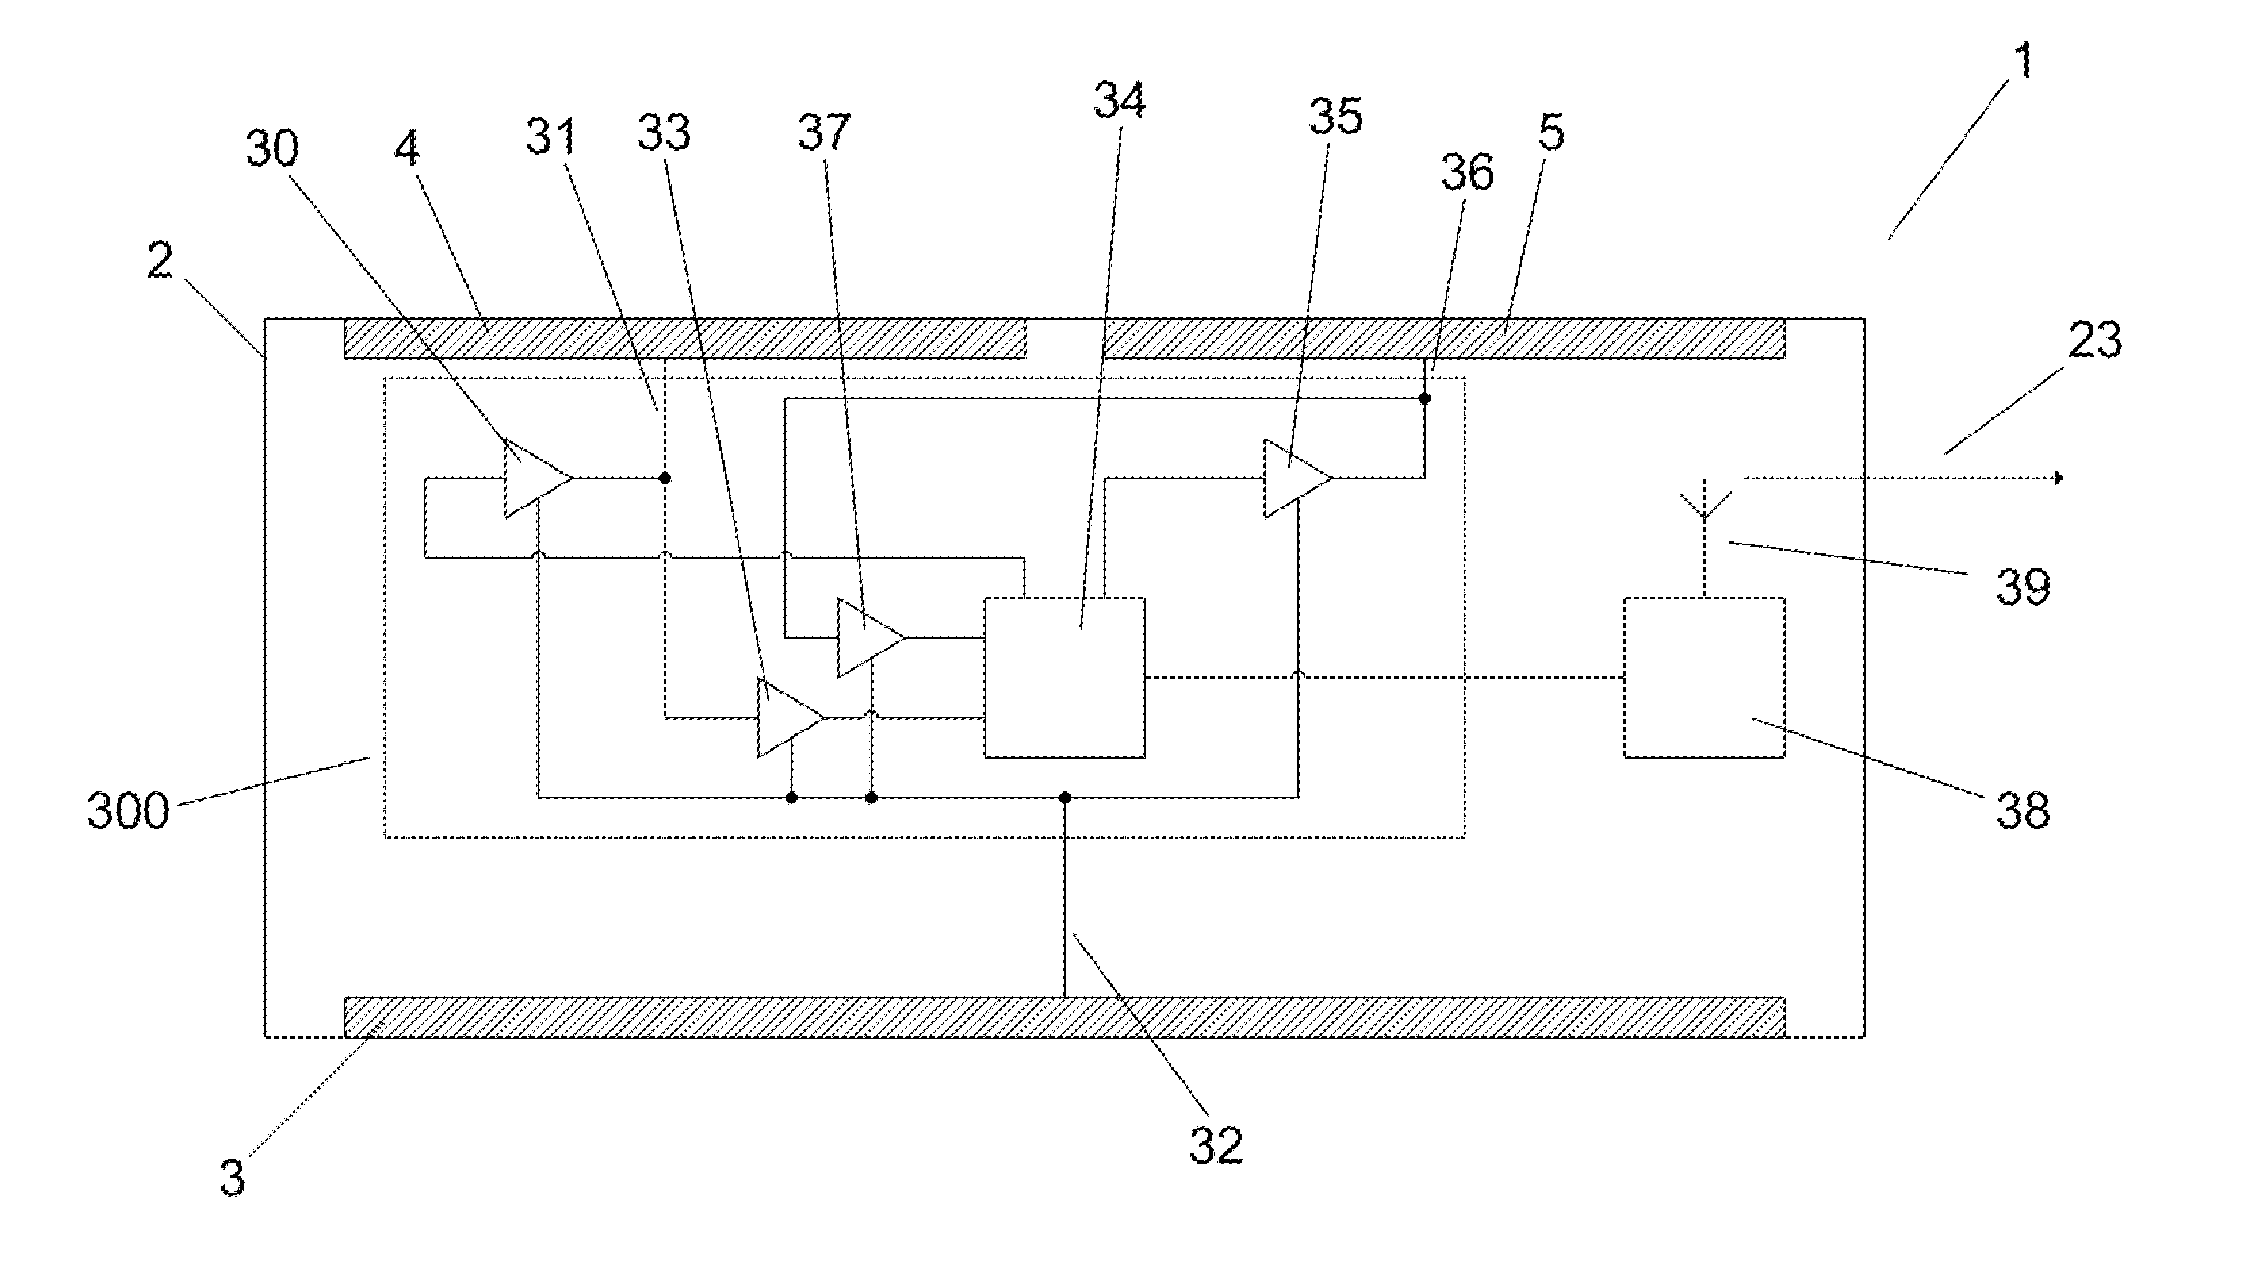 Body-worn control apparatus for hearing devices